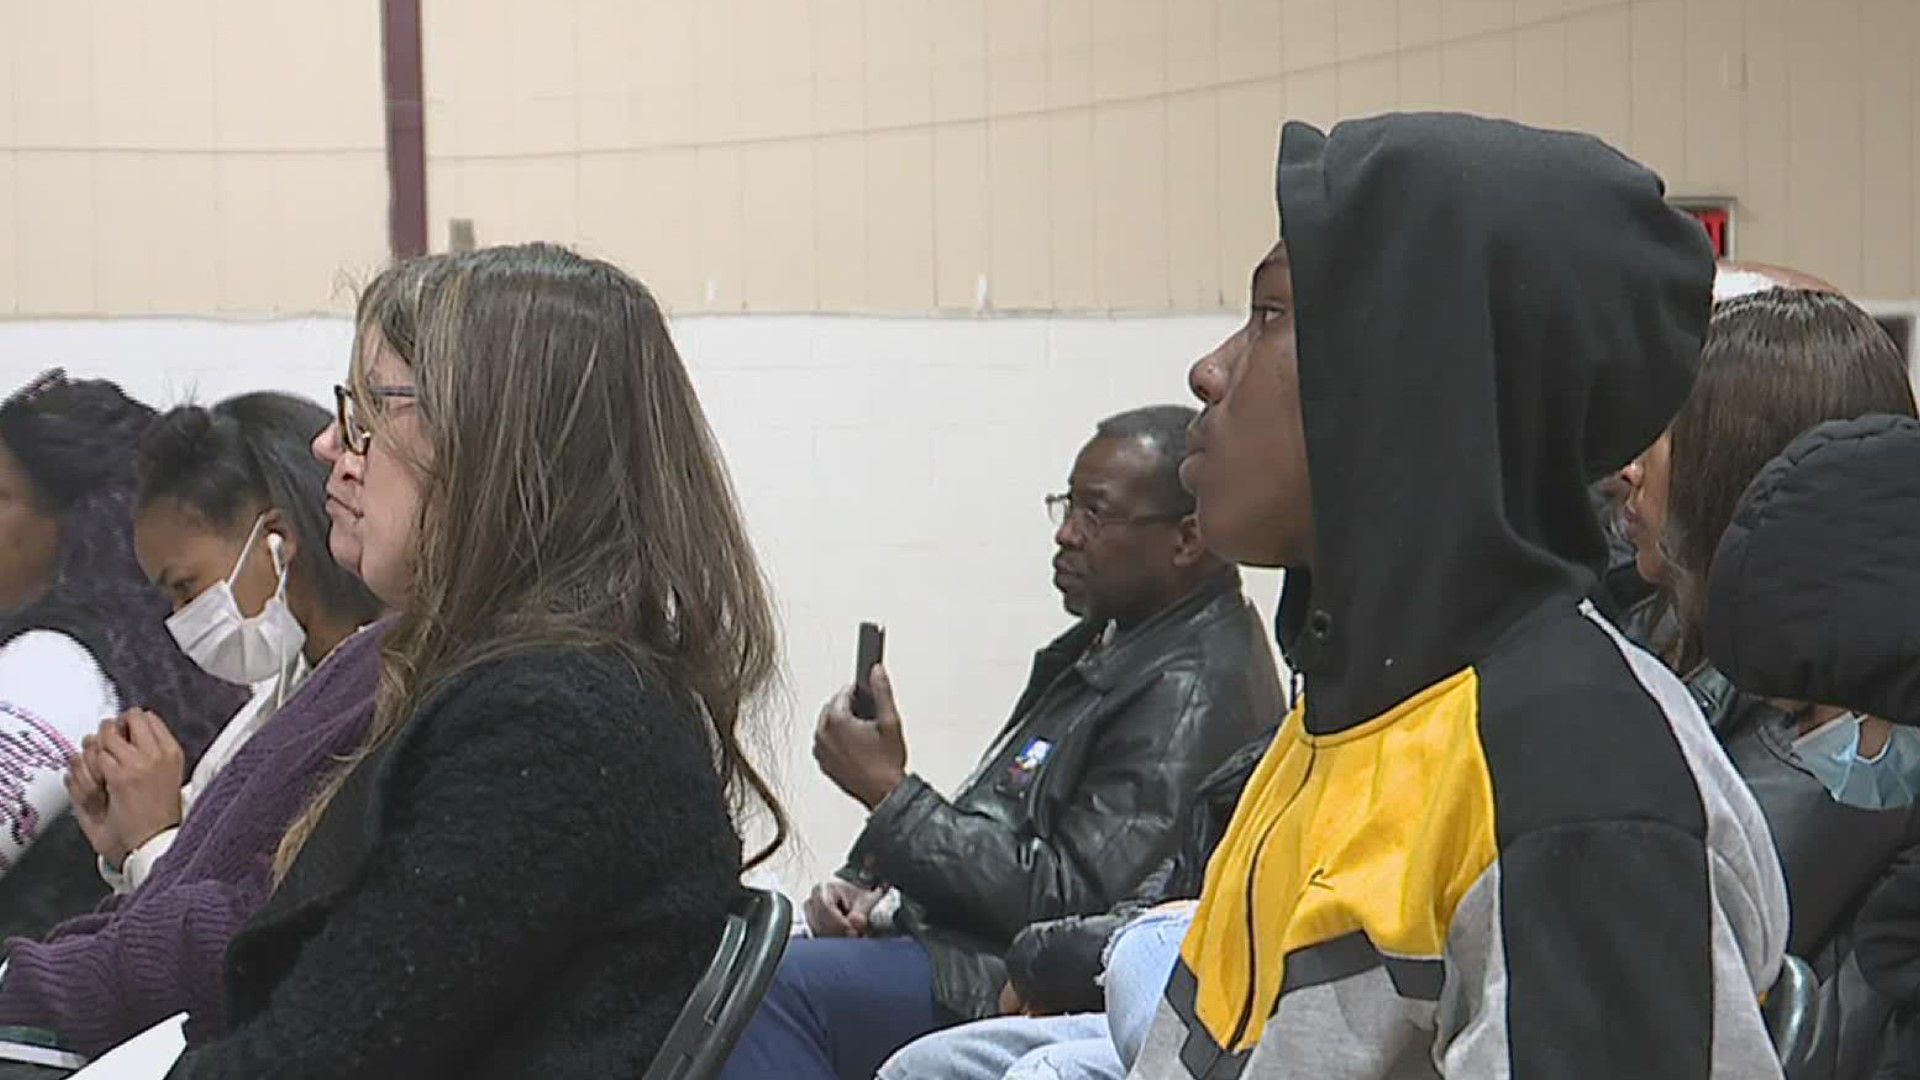 A town hall on gun violence in Harrisburg hopes to engage teens and help stop crime.